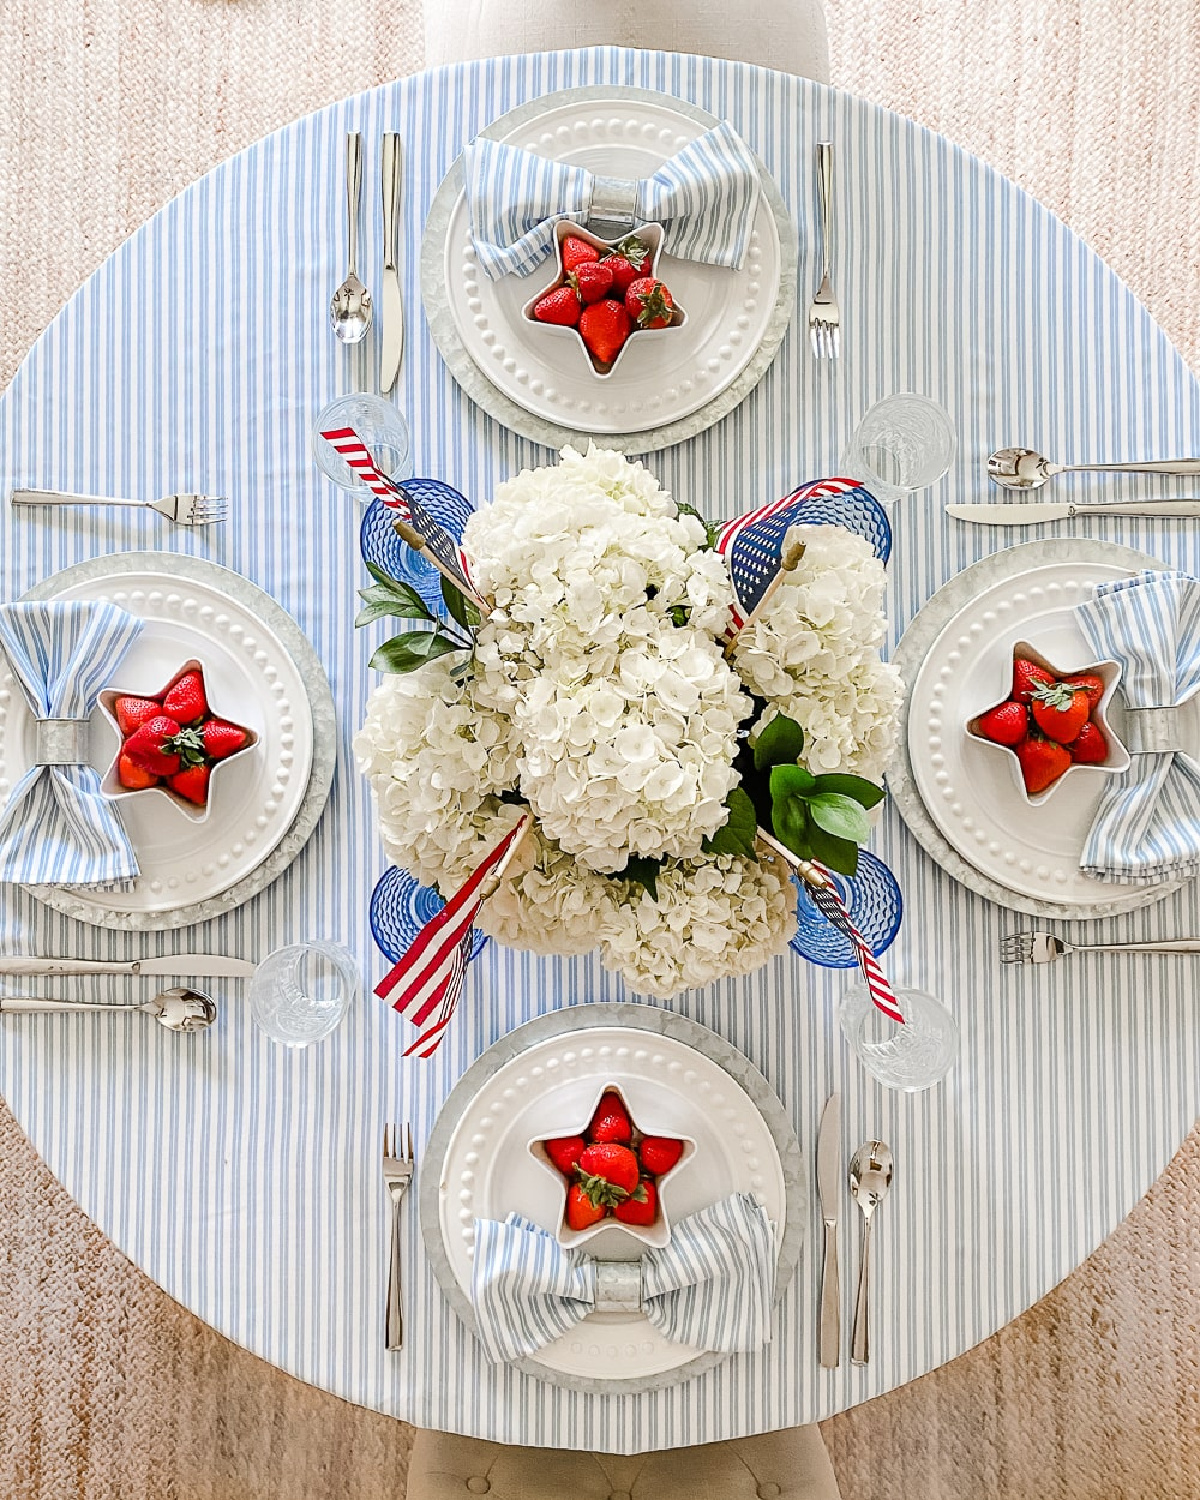 Beautiful 4th of July tablescape by The Diary of a Debutante with star dishes layered on light blue. #4thofjuly #redwhiteandbluetablescapes